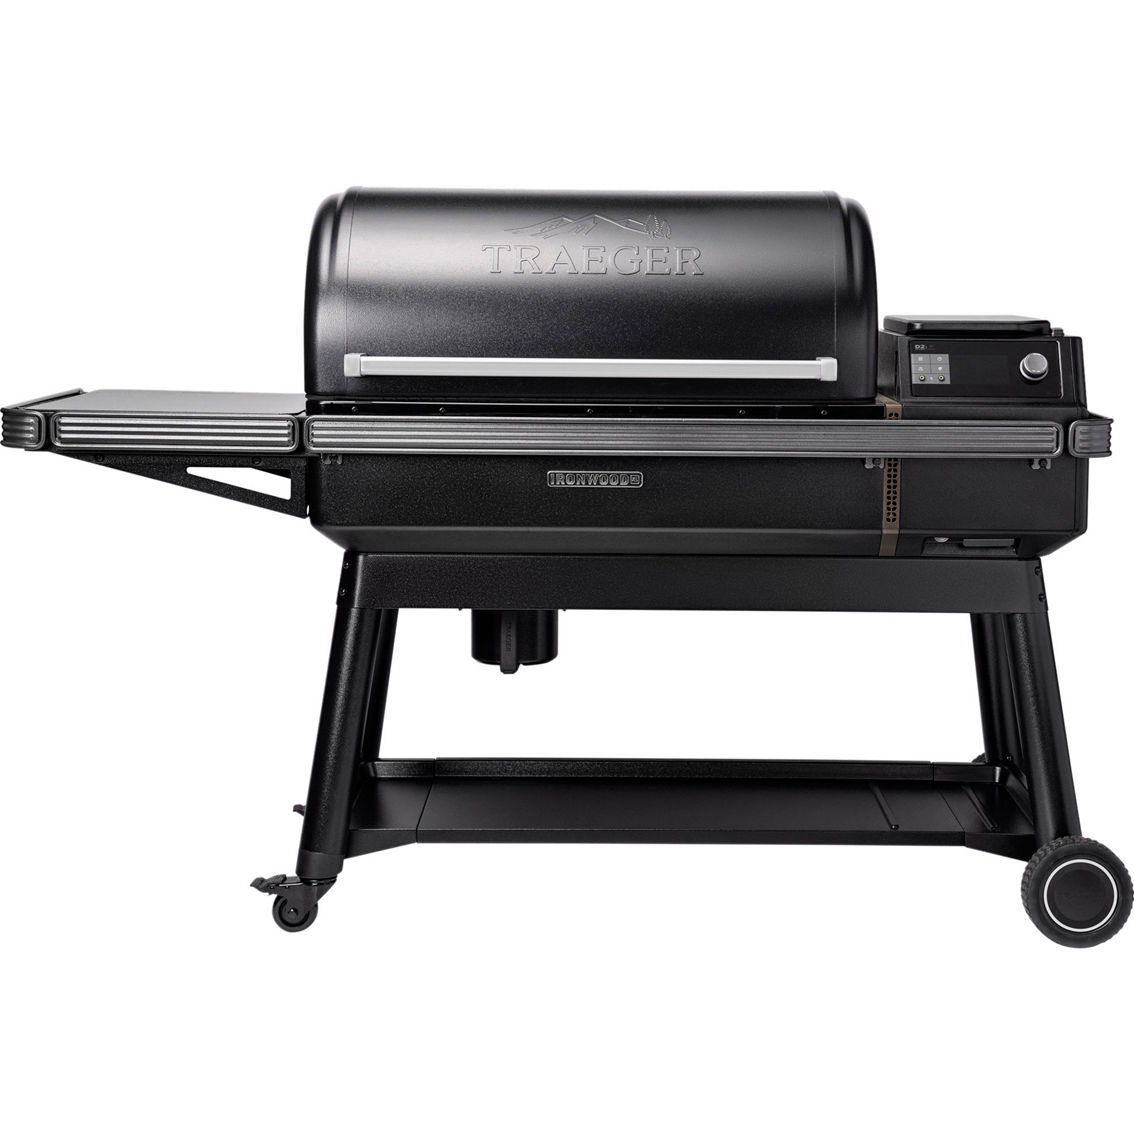 Traeger New Ironwood XL Wood Pellet Grill - Image 2 of 6